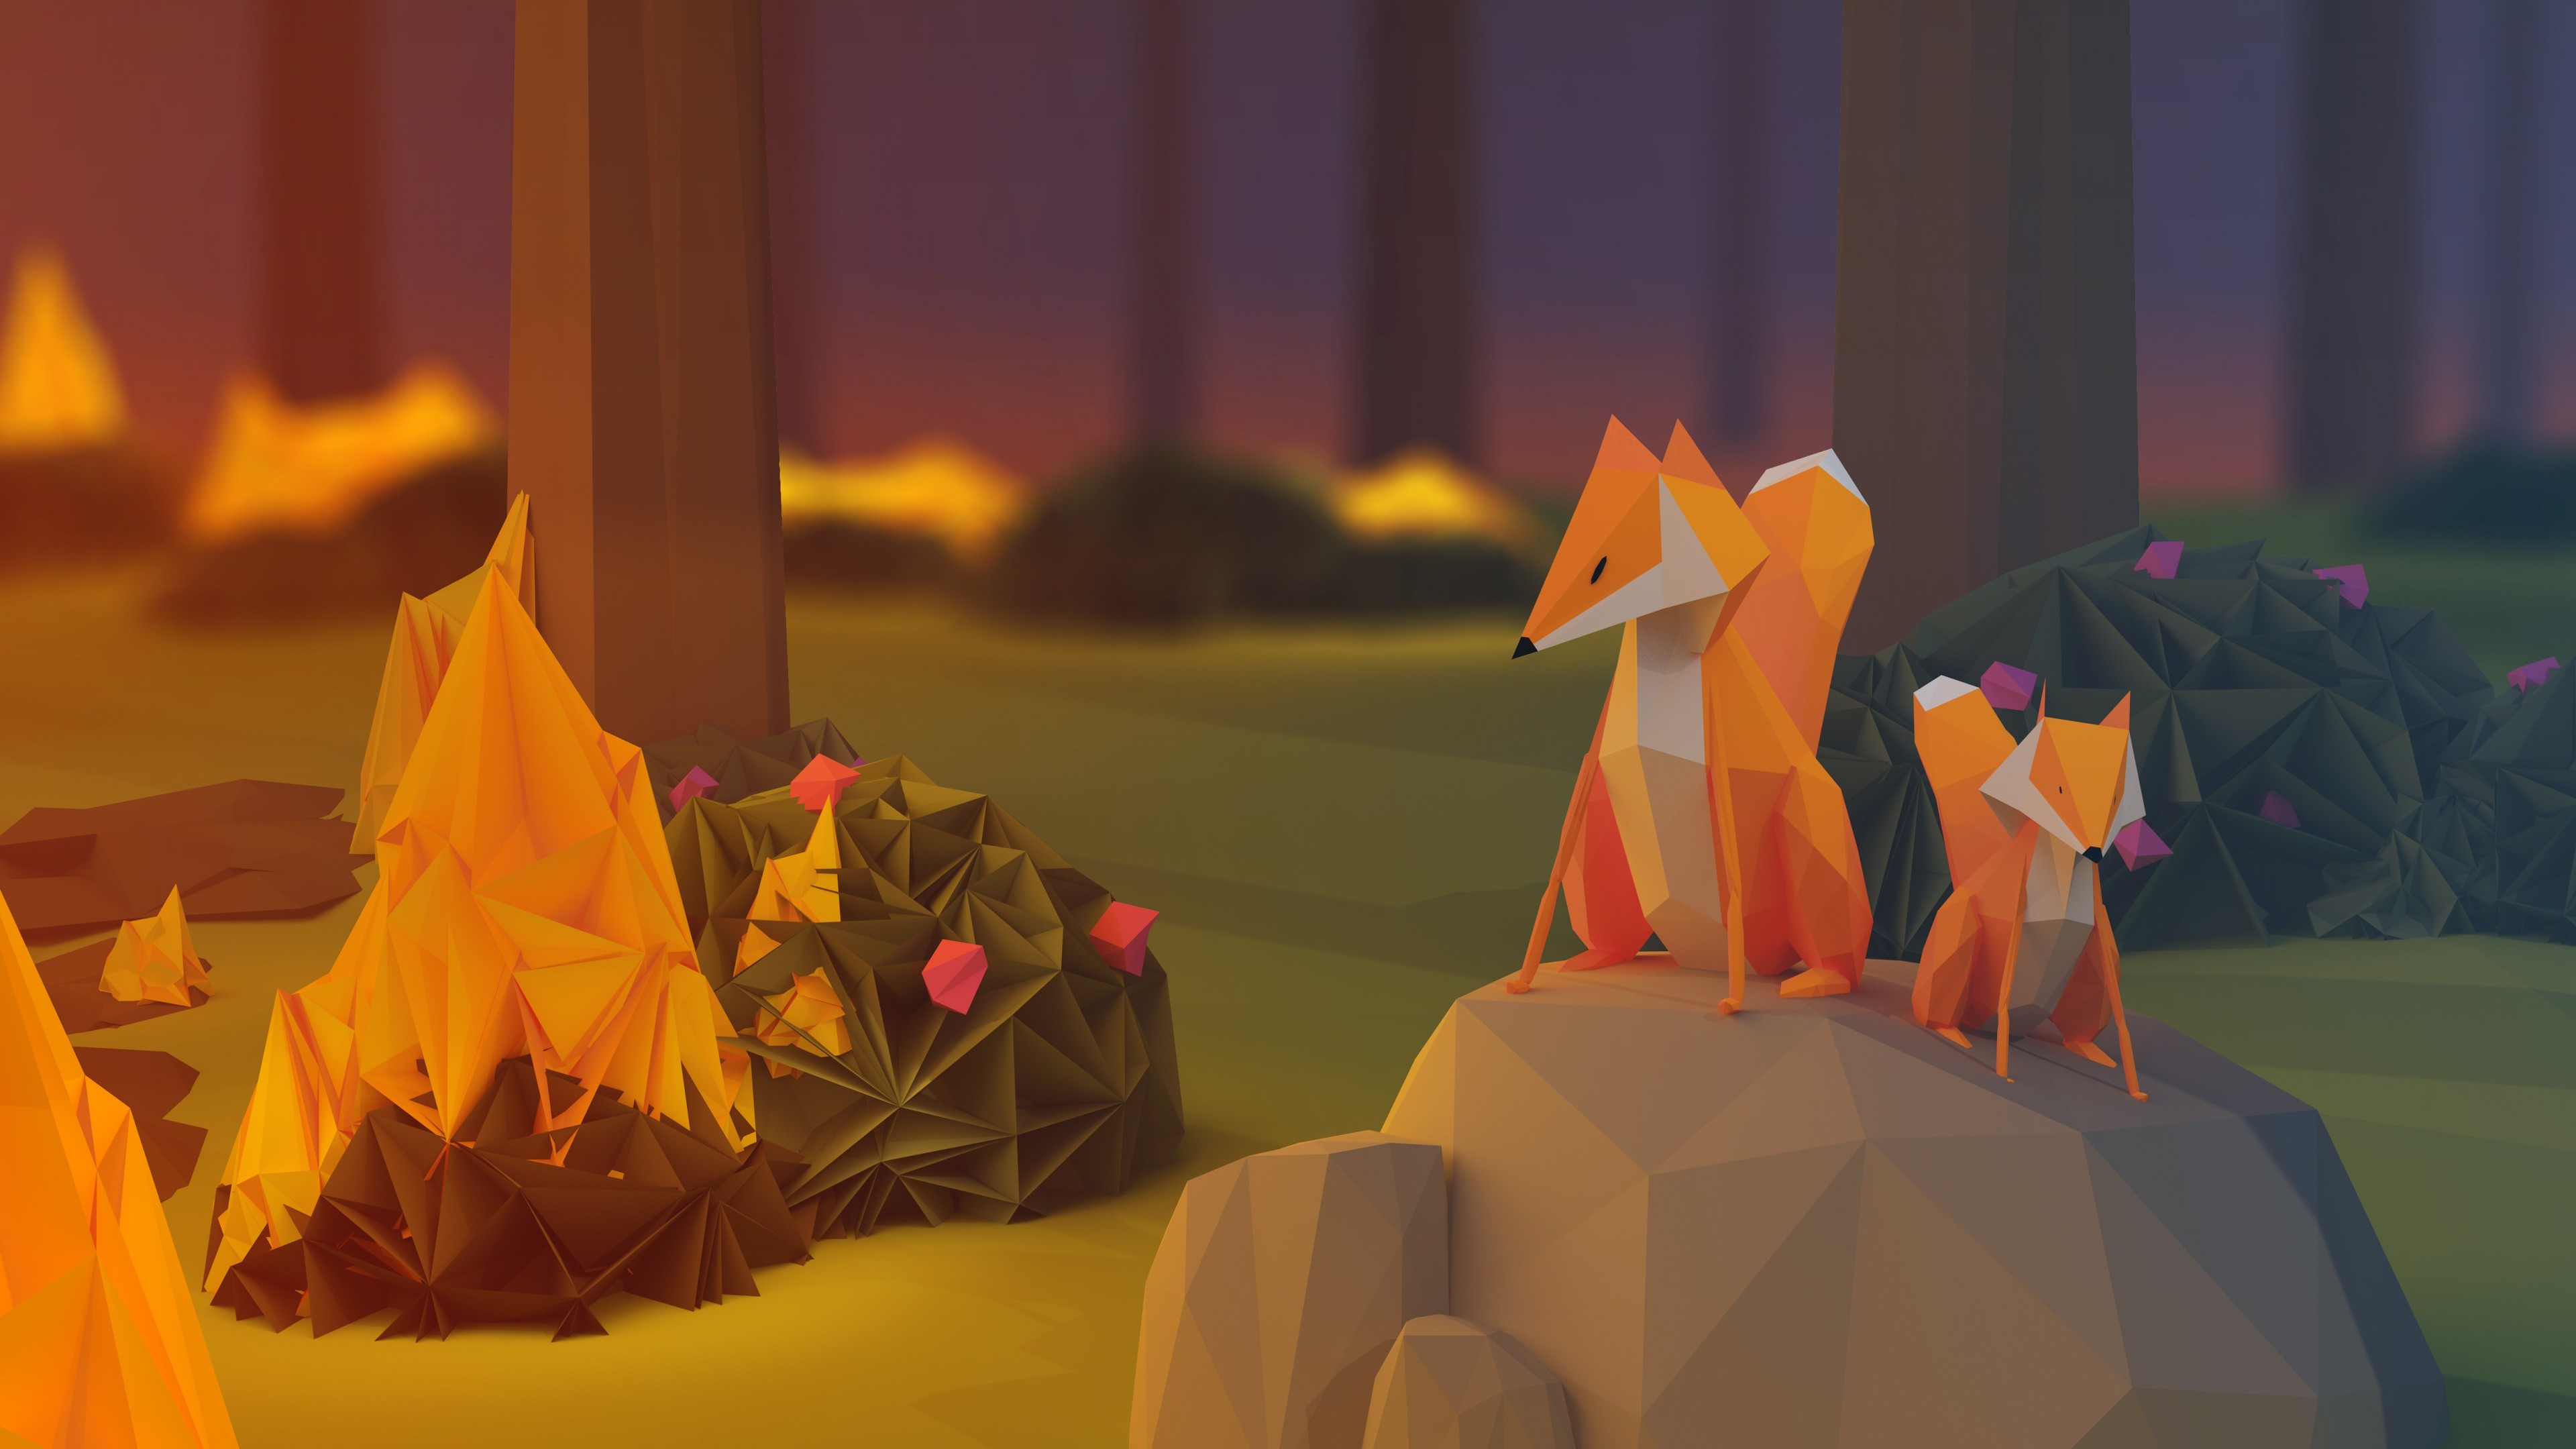 Low Poly Foxes Wallpaper - Low Poly Fox Background - HD Wallpaper 